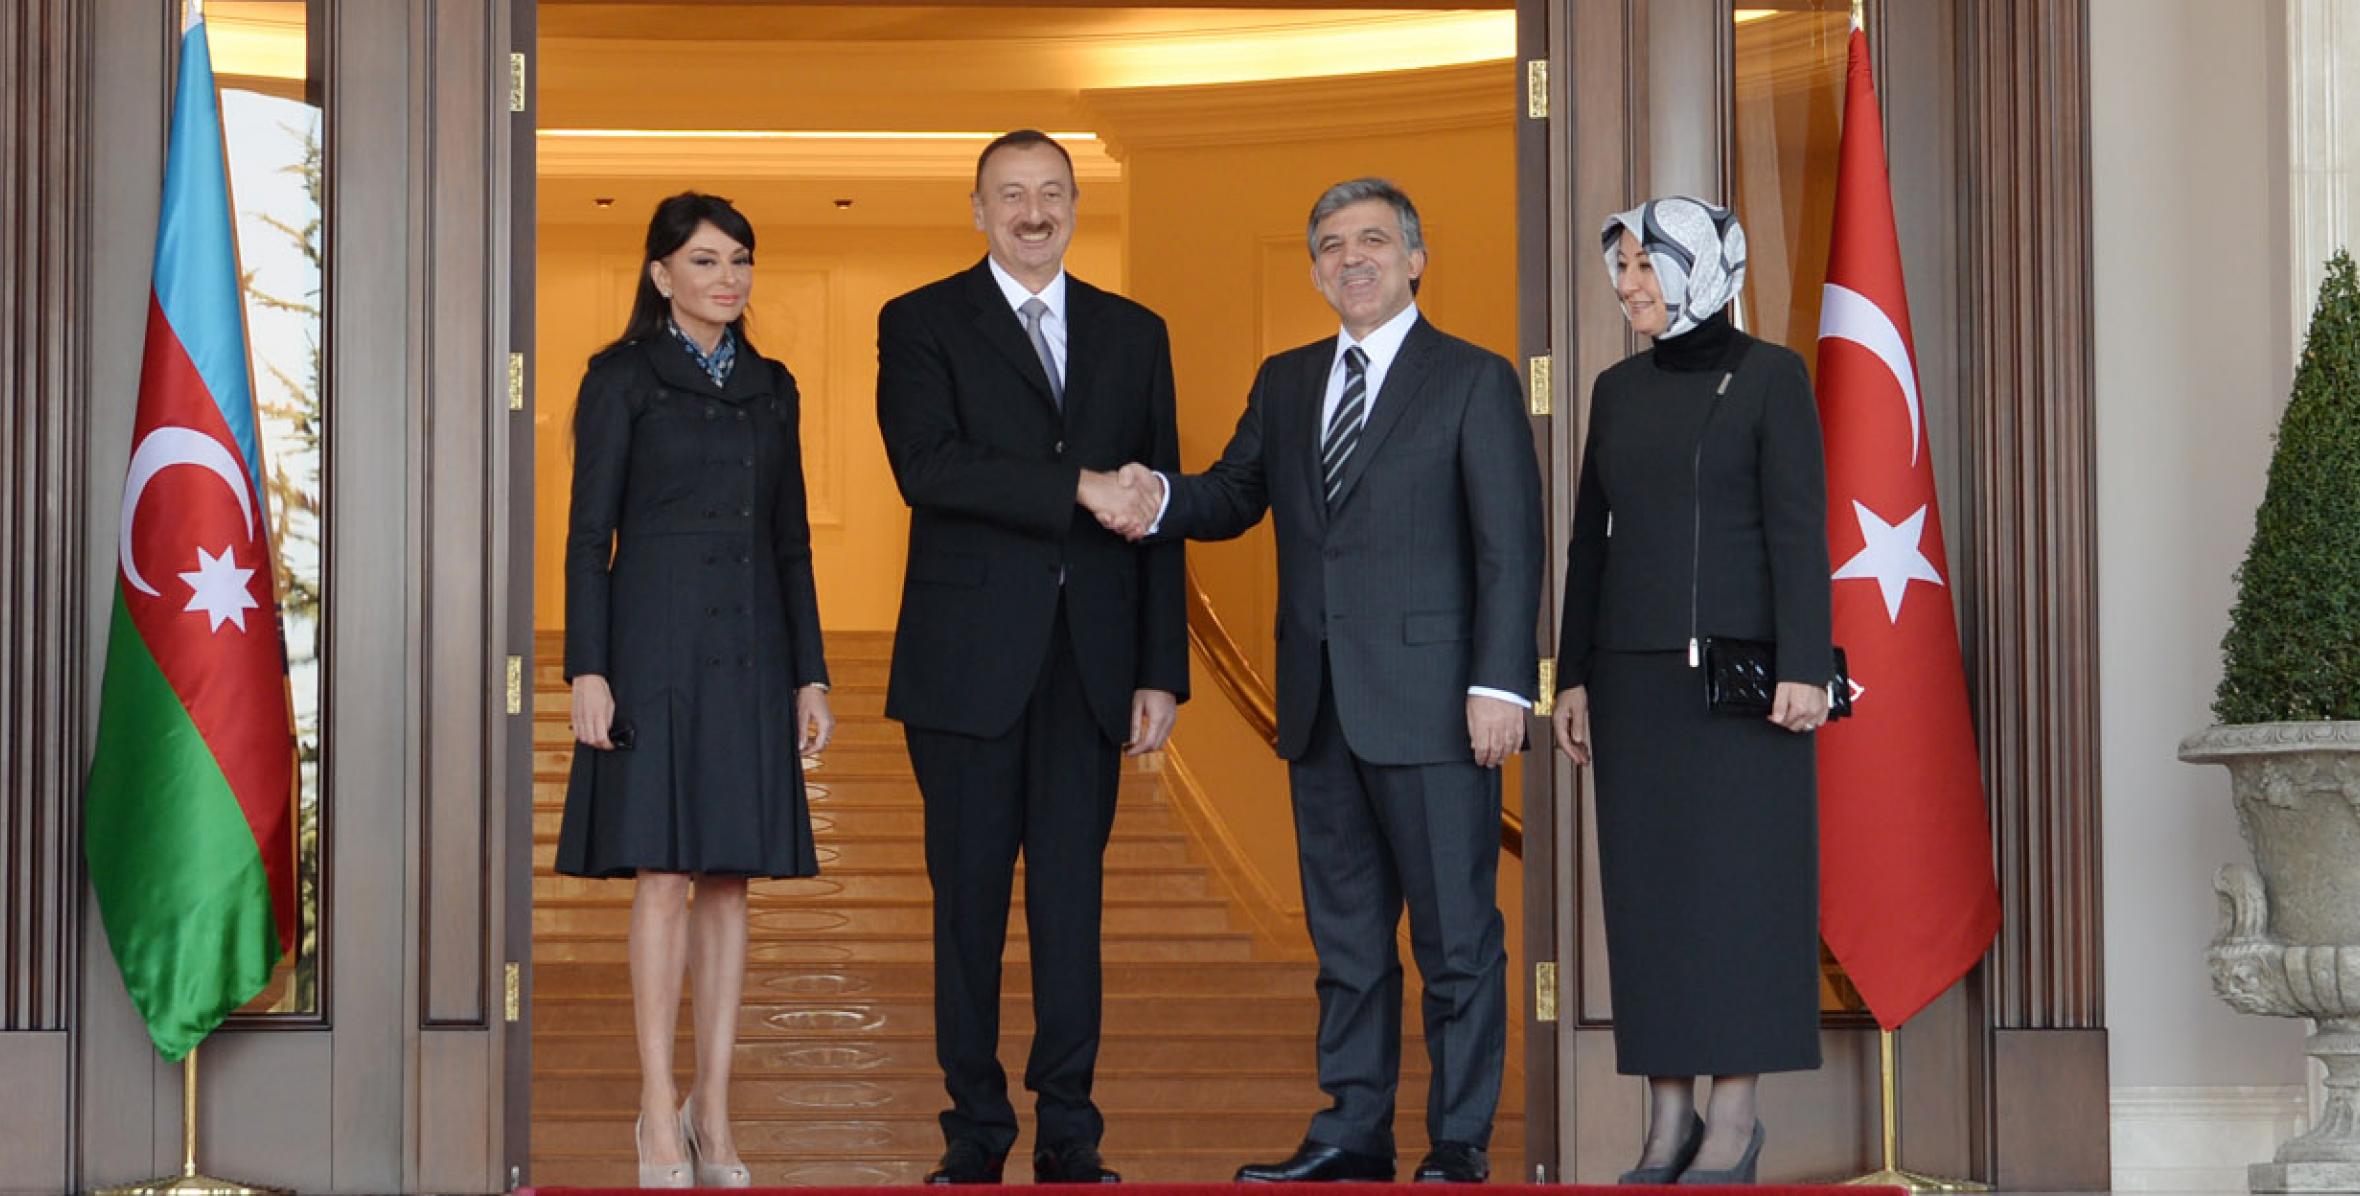 Official visit of Ilham Aliyev to Turkey